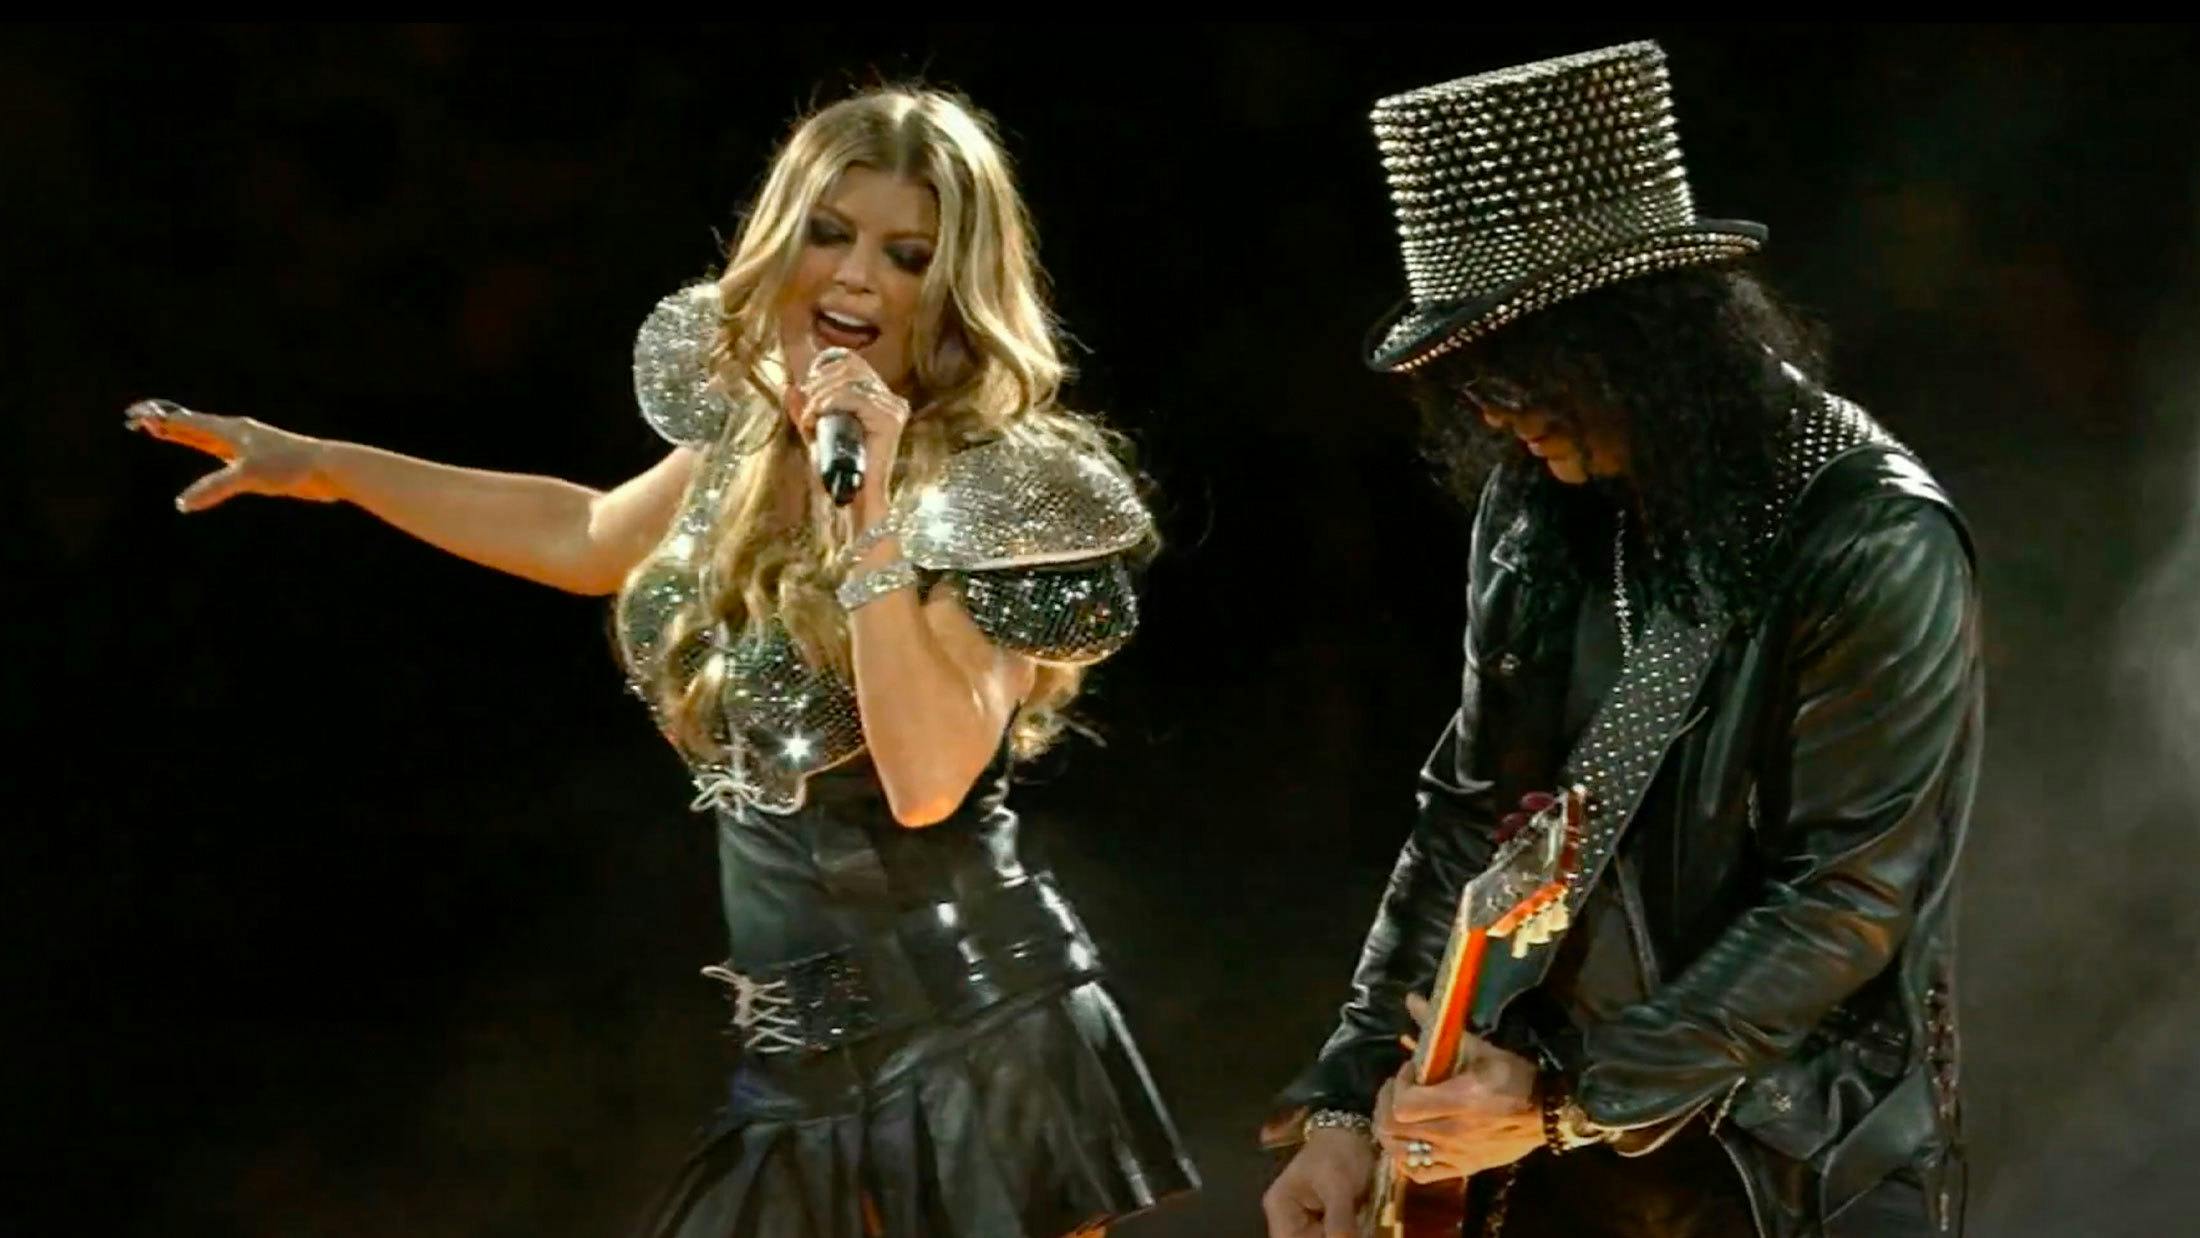 Remembering the worst-ever performance of Sweet Child O’ Mine, at the Super Bowl halftime show